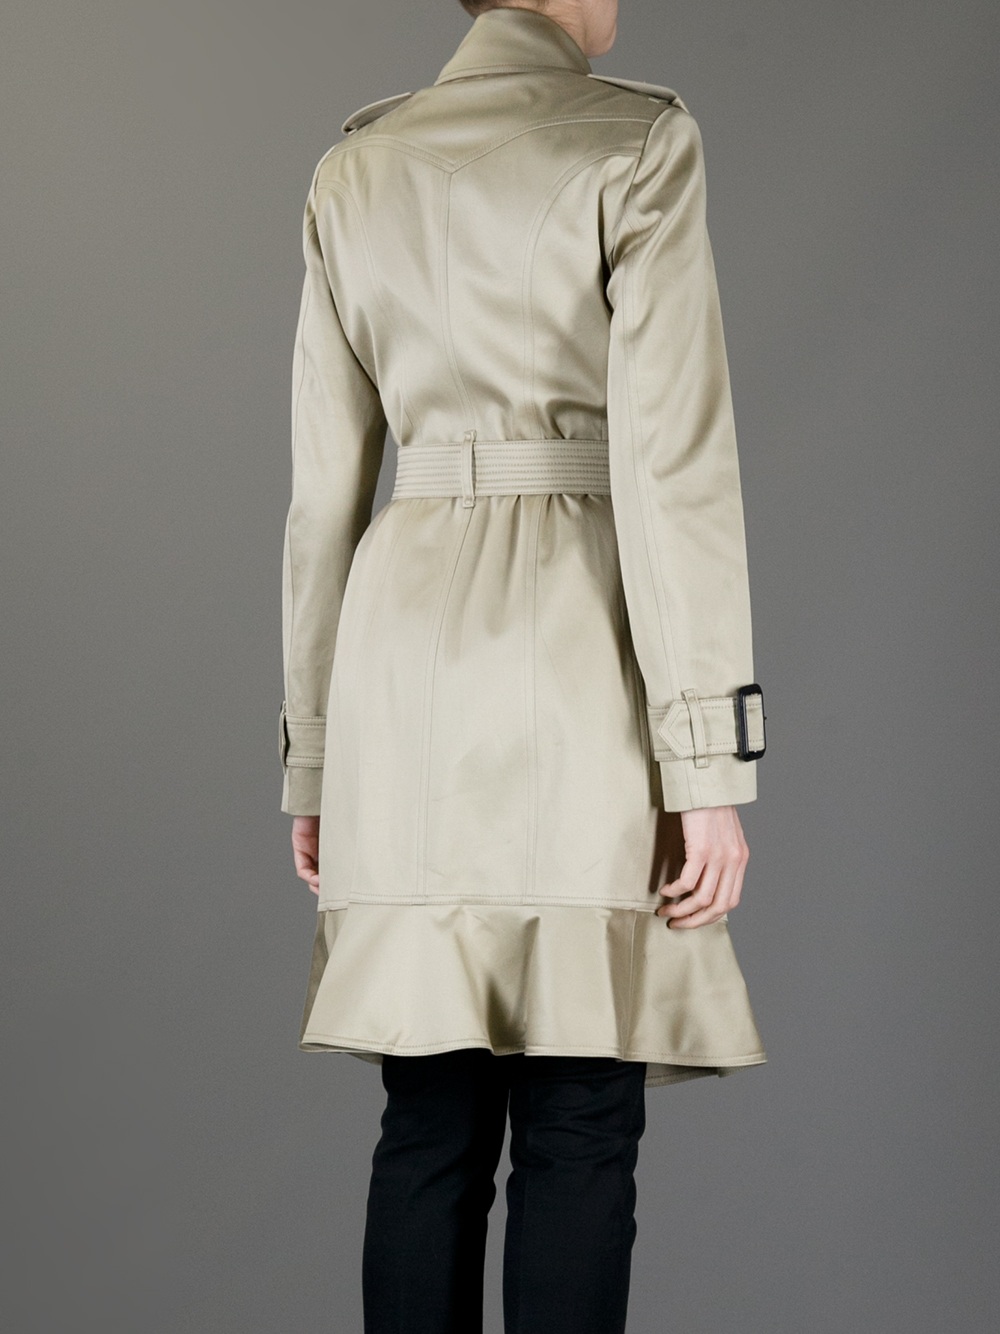 Burberry Brit Frill Hem Trench Coat in Beige (Natural) - Lyst